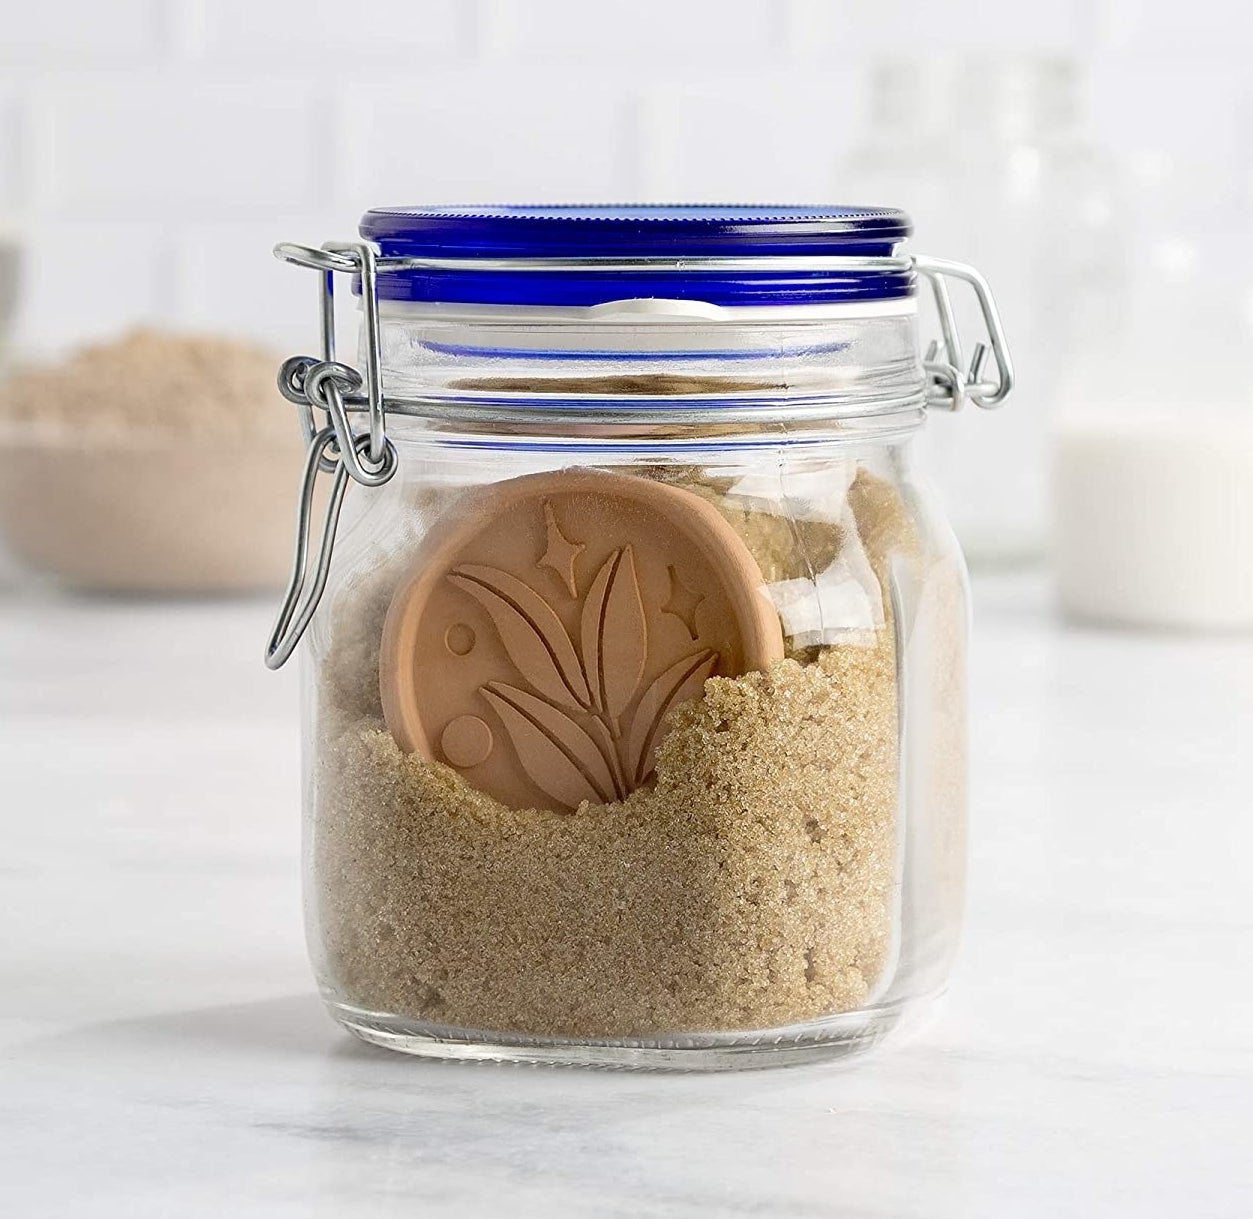 a jar of brown sugar with one of the terracotta discs visible inside